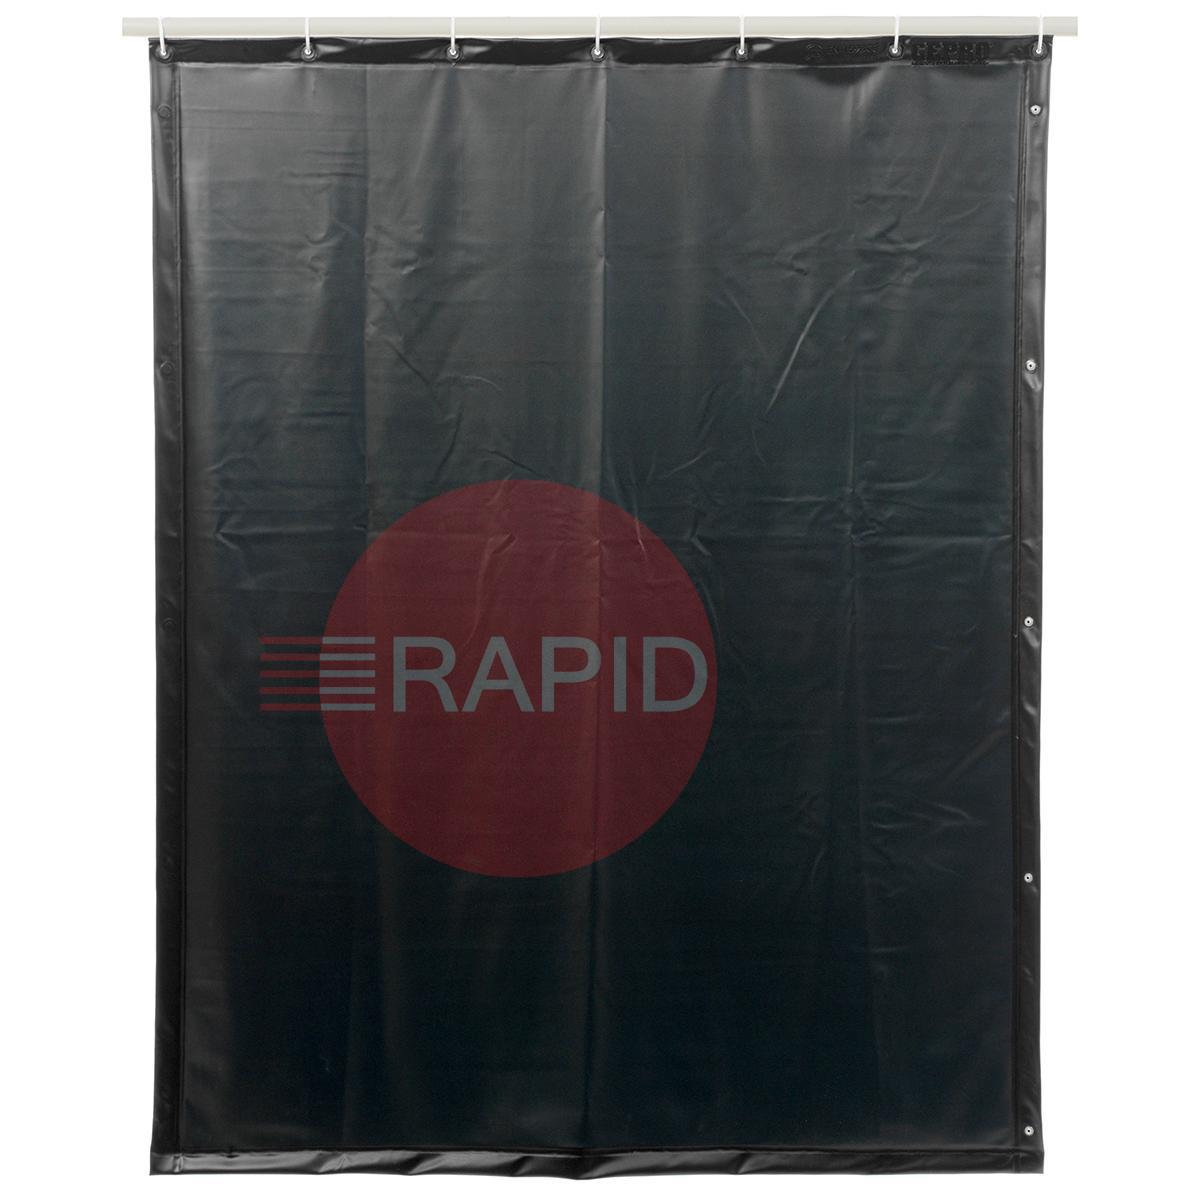 14.19.06  Cepro Green-9 Welding Curtain with Eyelets All Around - 180cm x 180cm, EN 25980